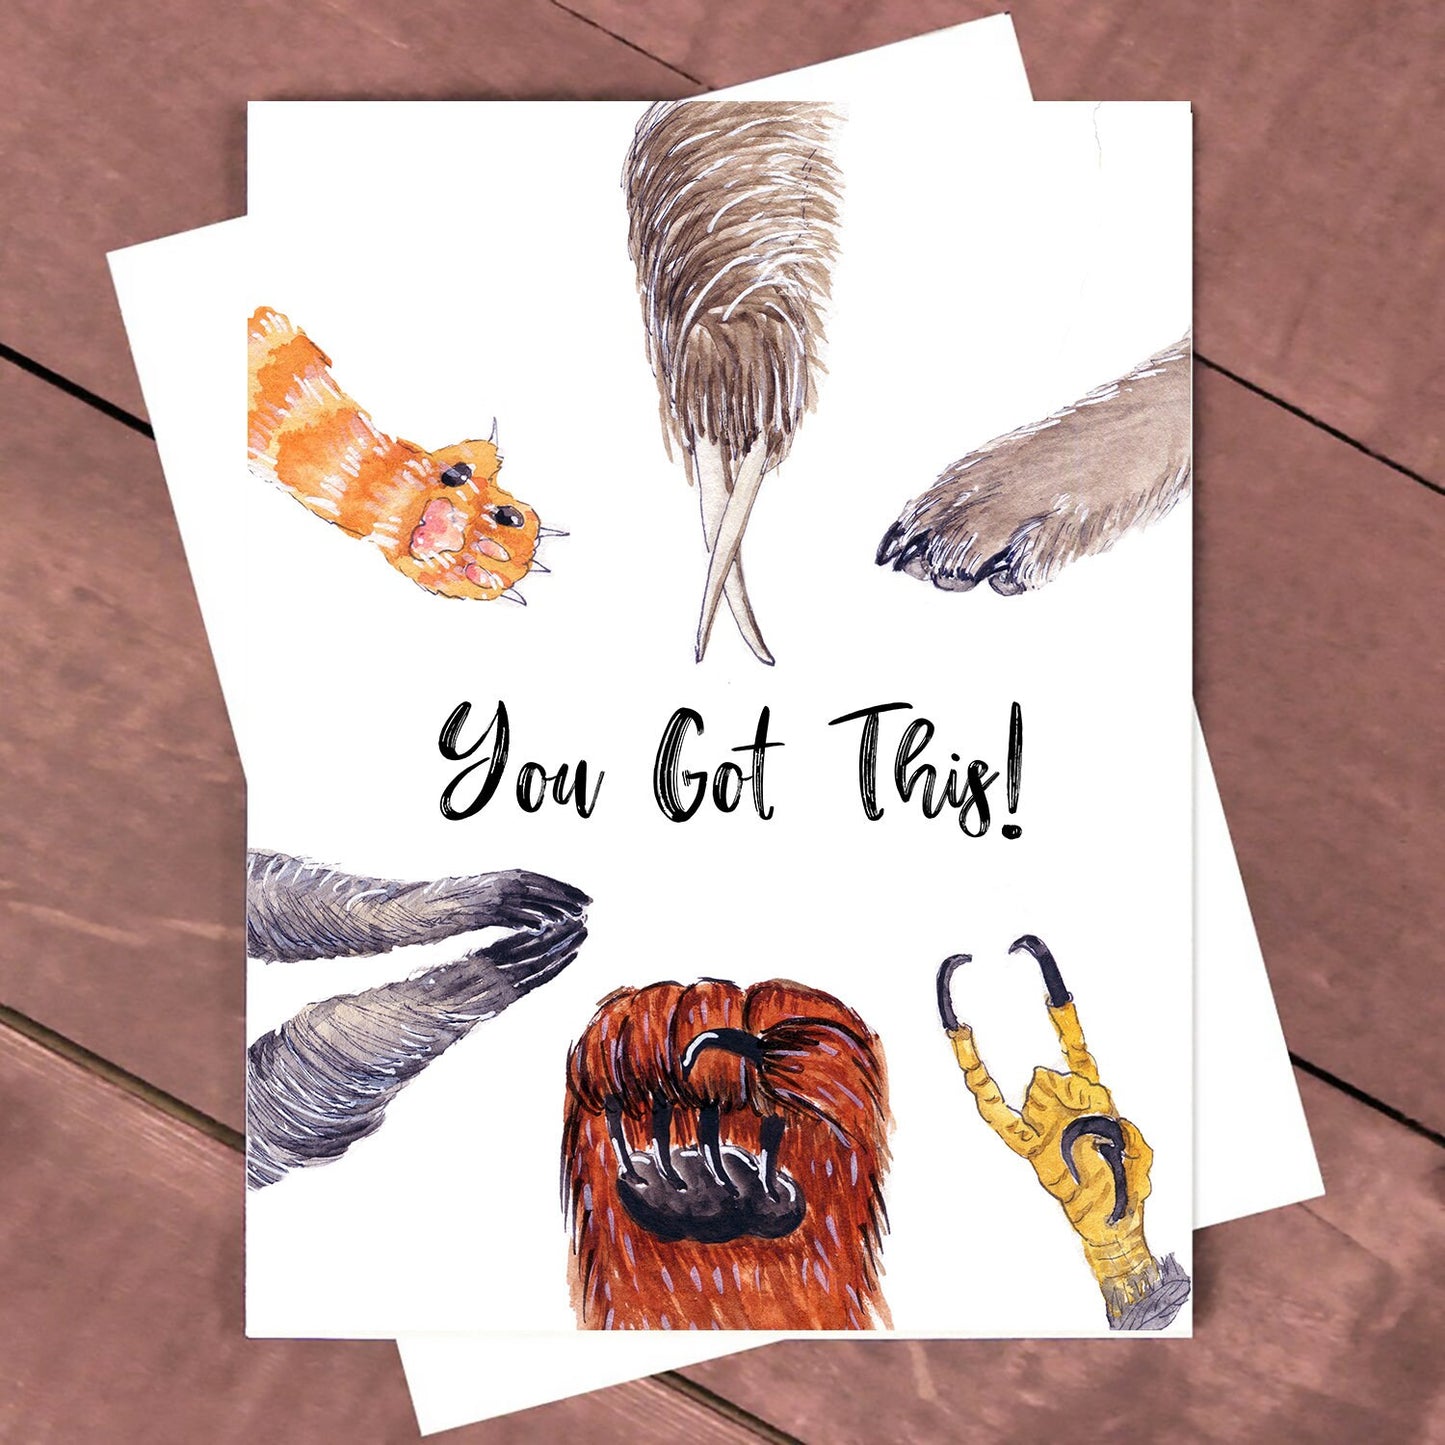 You Got This Encouragement Card For Her, Animals Paws Fist Bump High Five Motivation Cards For Friends, Funny New Job Card For Him, New Job